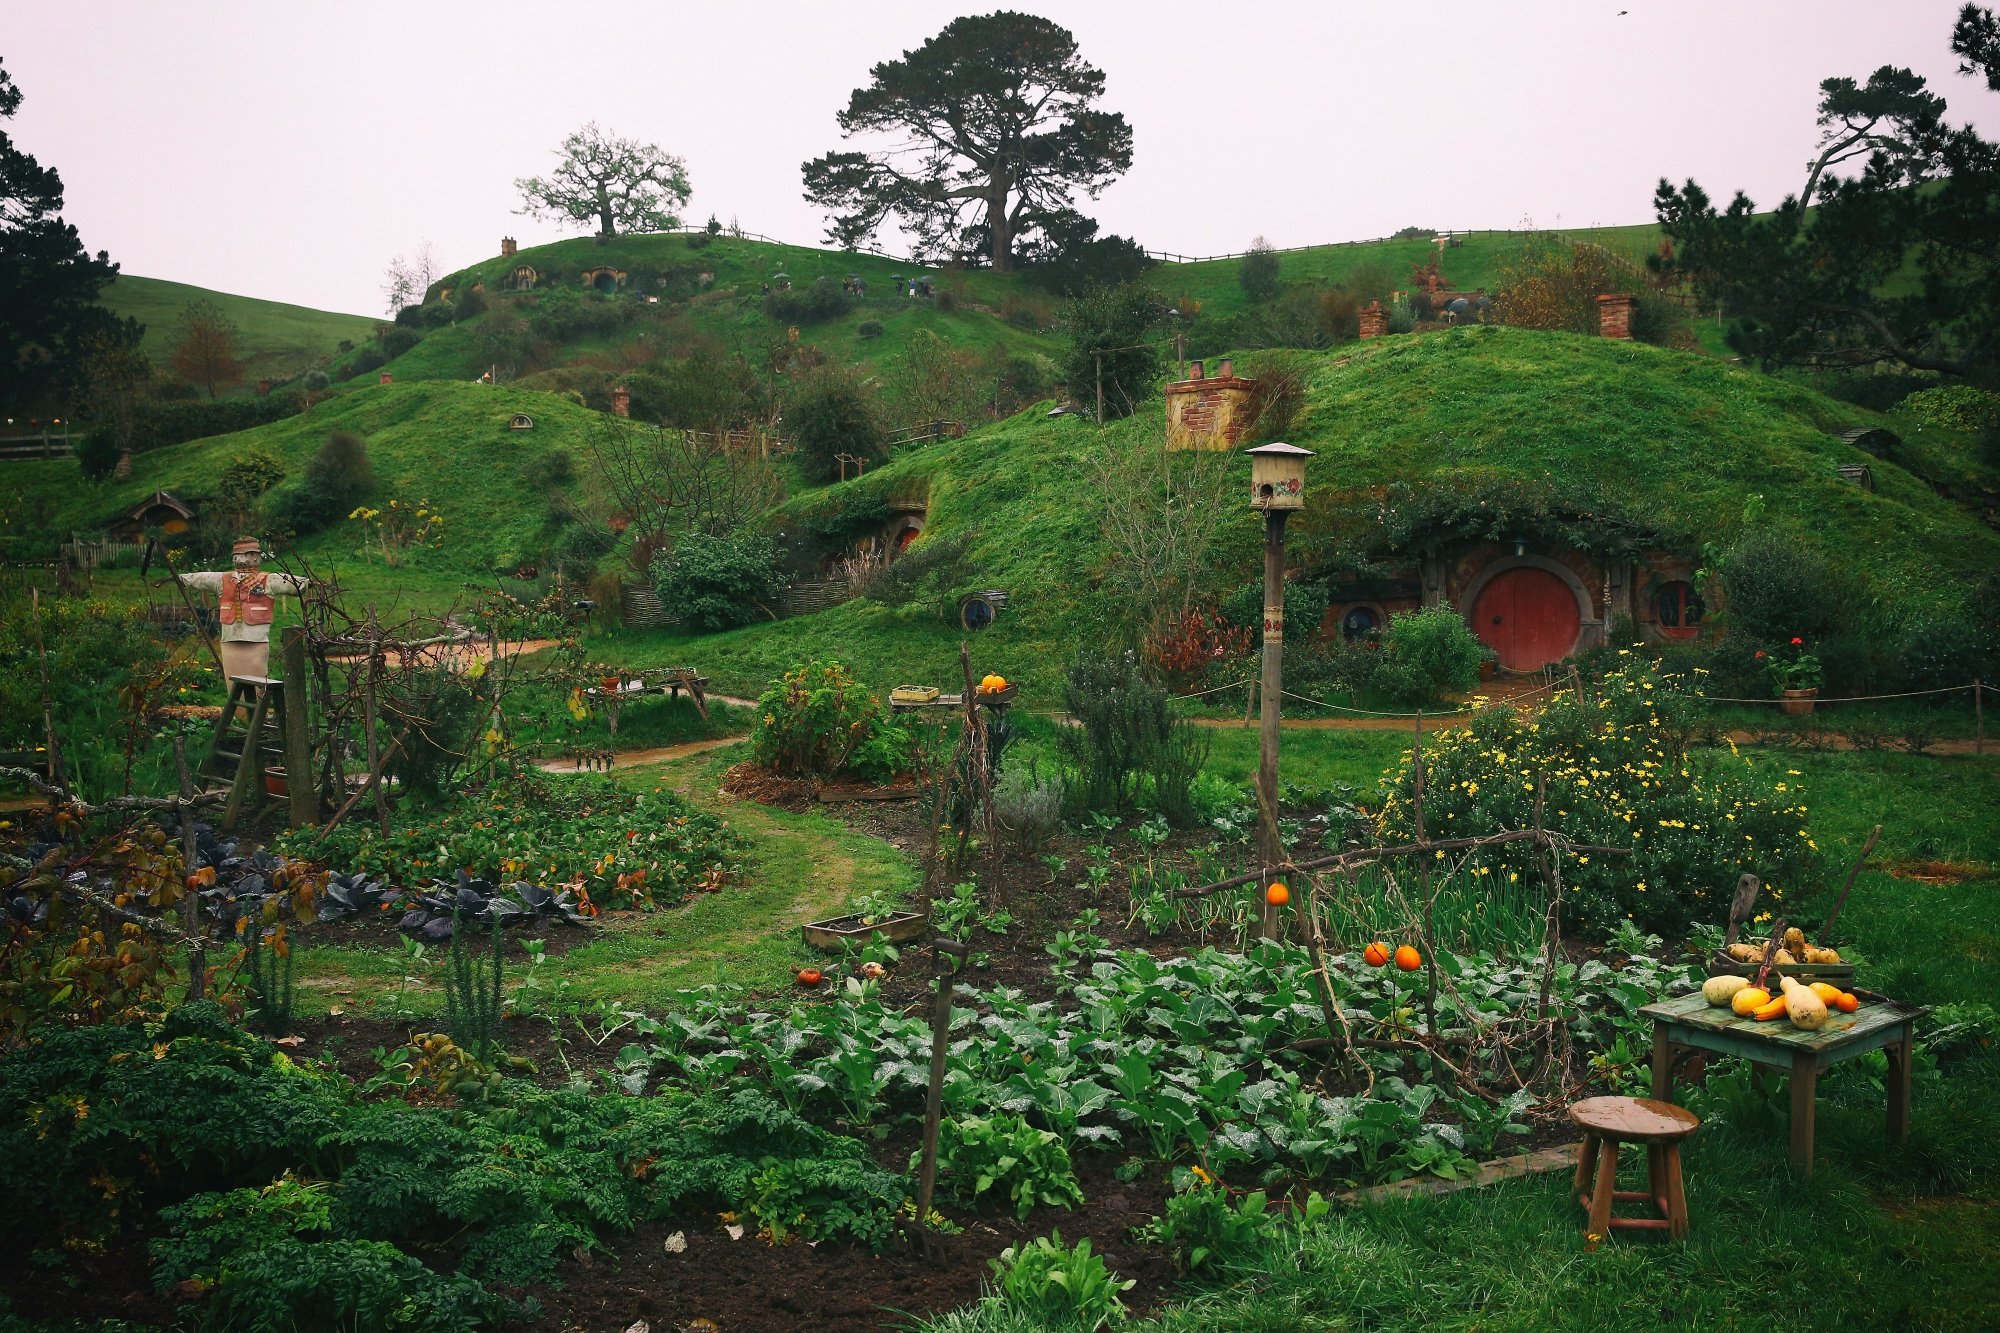 'Lord of the Rings' hobbit home in the Shire filming location